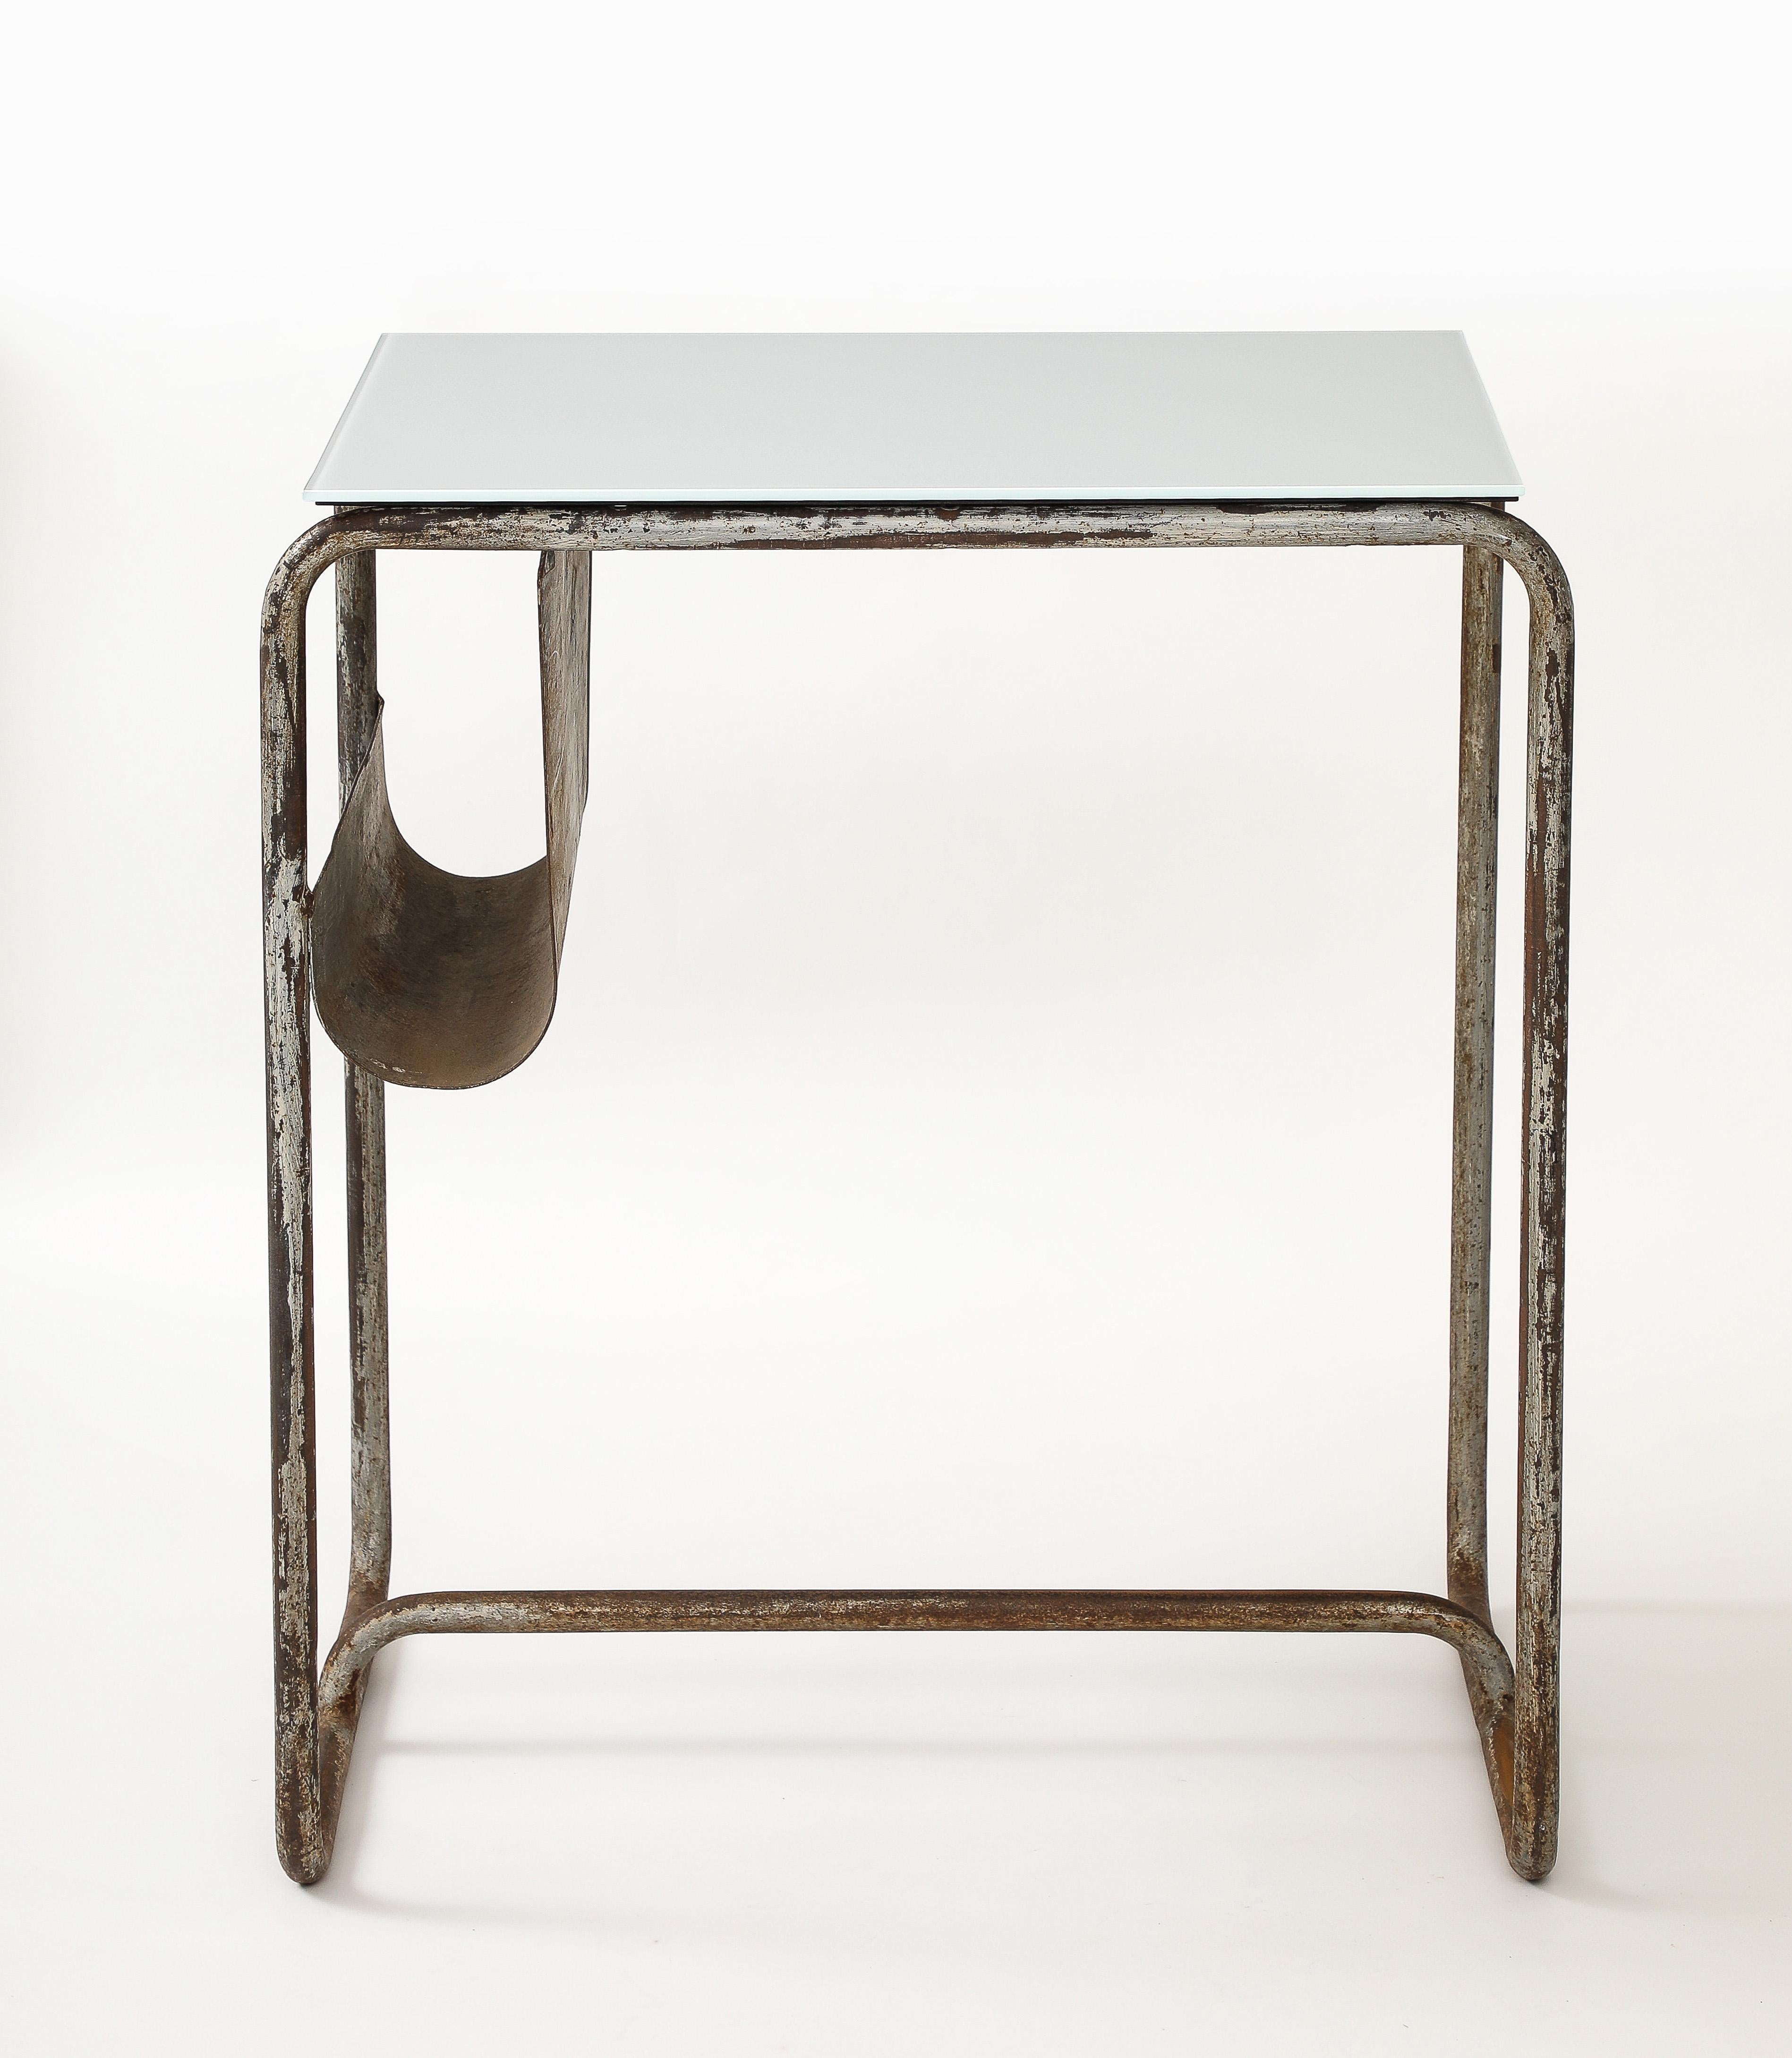 Early Modernist Desk Side Table, Nickel Patina, Opaline Top, France, c. 1920 For Sale 3